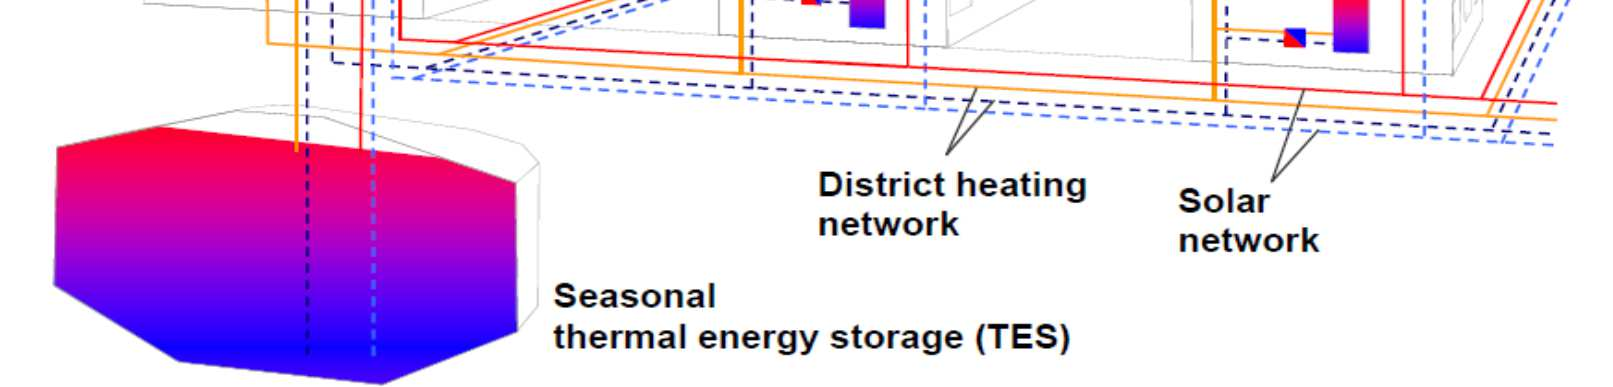 EFFICIENT TECHNOLOGIES: Case Study: STES & Cogeneration & District Heating Electricity generation by cogeneration systems is limited by the use of the heat produced.